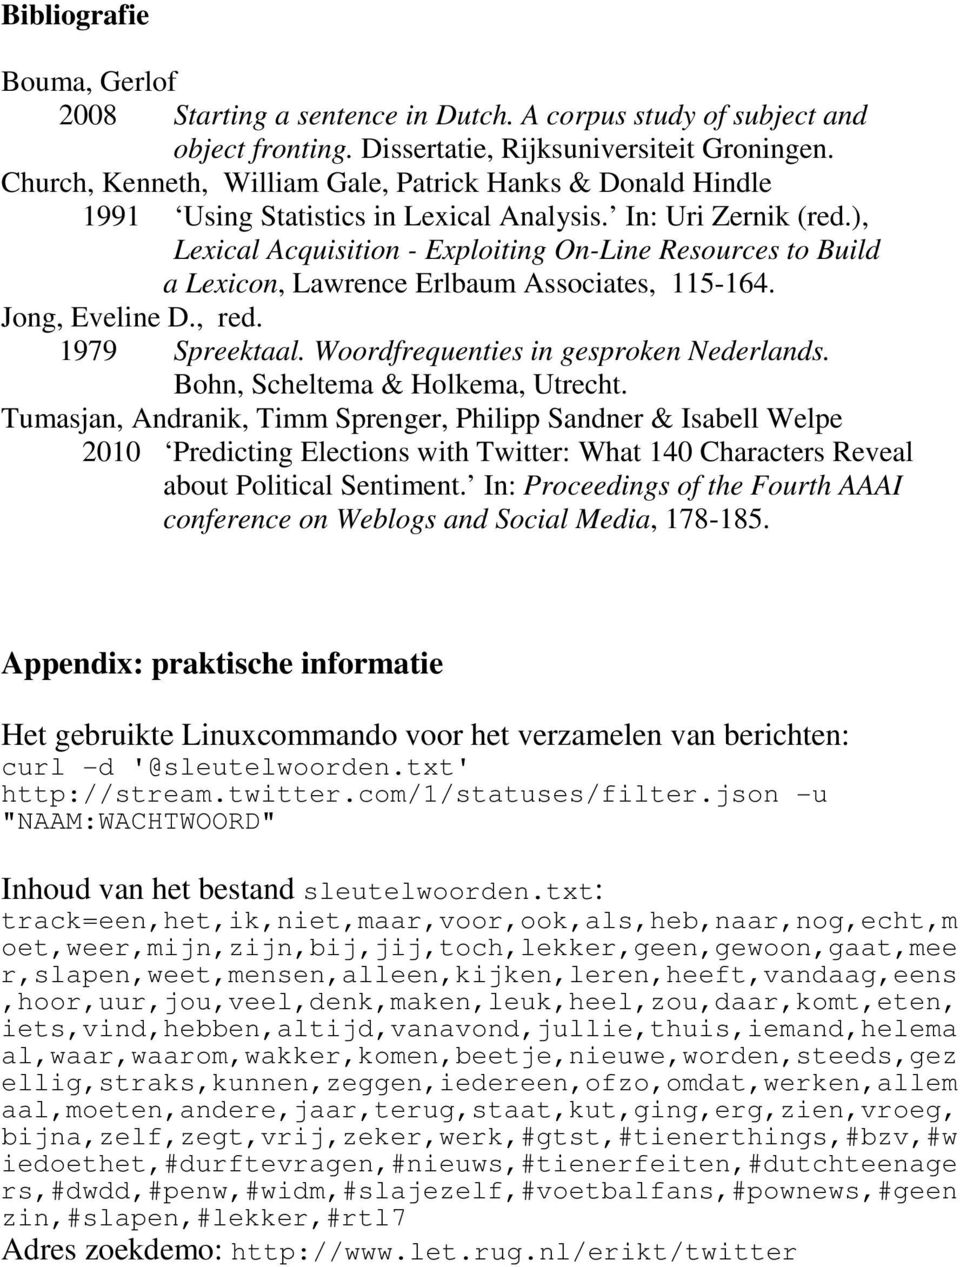 ), Lexical Acquisition - Exploiting On-Line Resources to Build a Lexicon, Lawrence Erlbaum Associates, 115-164. Jong, Eveline D., red. 1979 Spreektaal. Woordfrequenties in gesproken Nederlands.